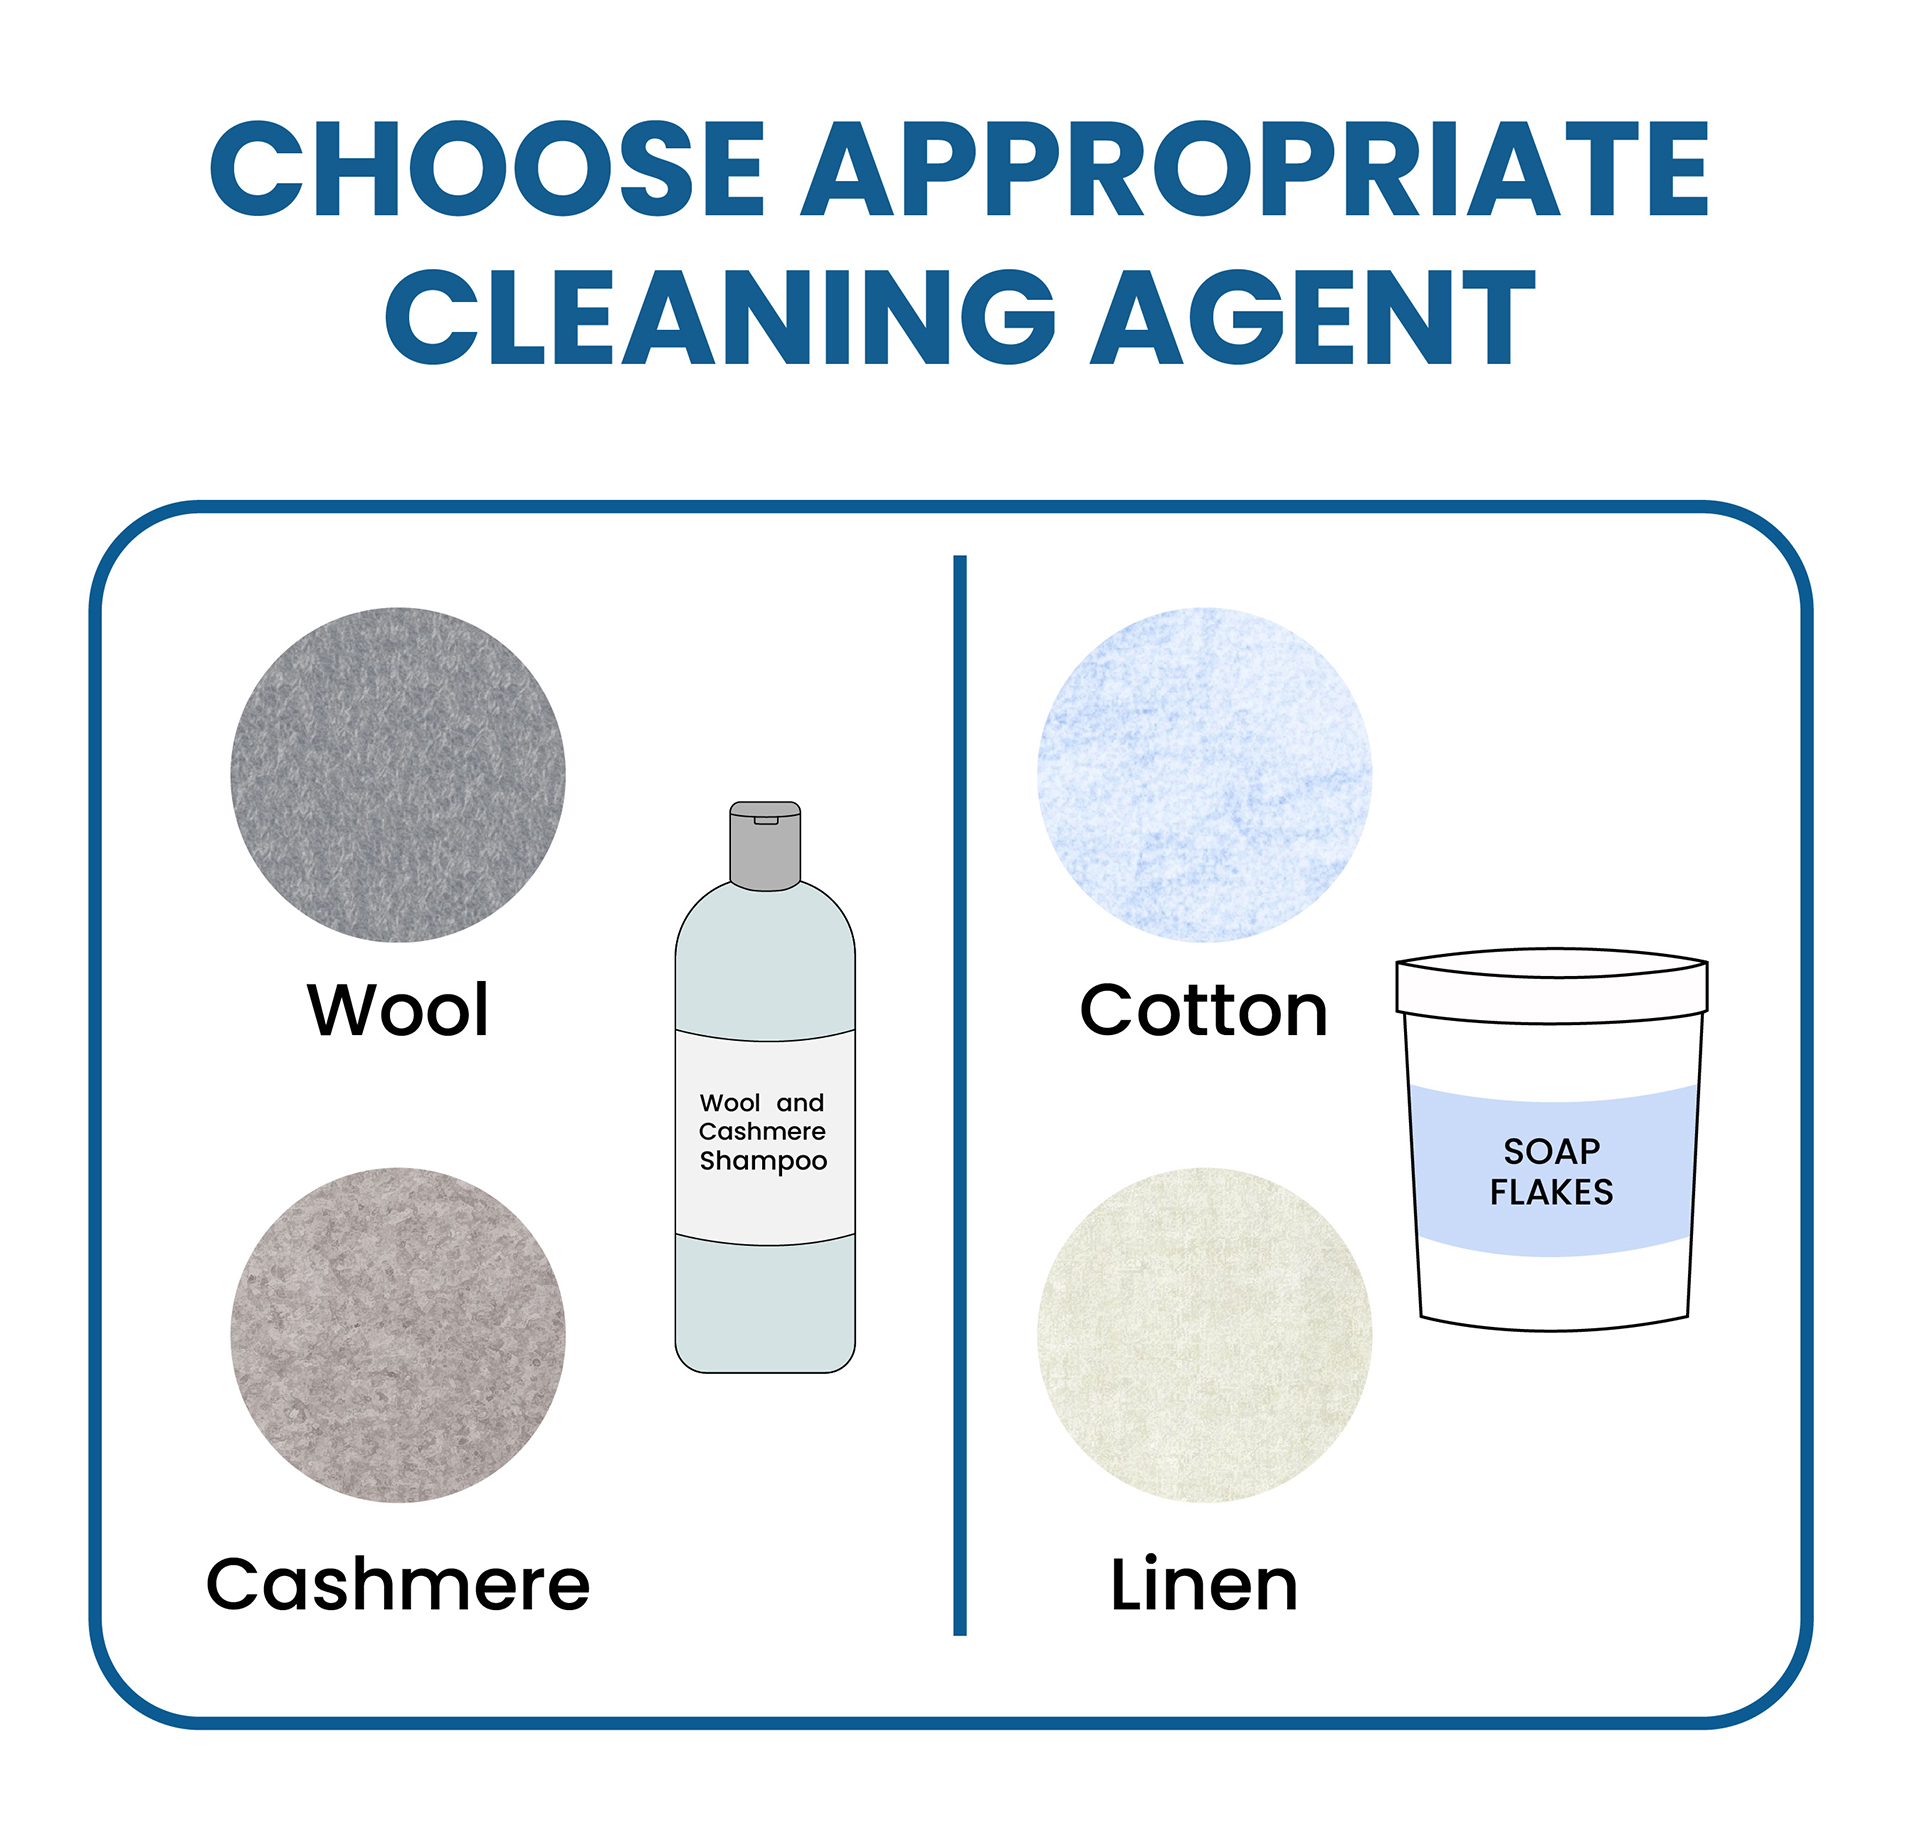 choose appropriate cleaning agent to wash your suit (based on your suit's fabric)